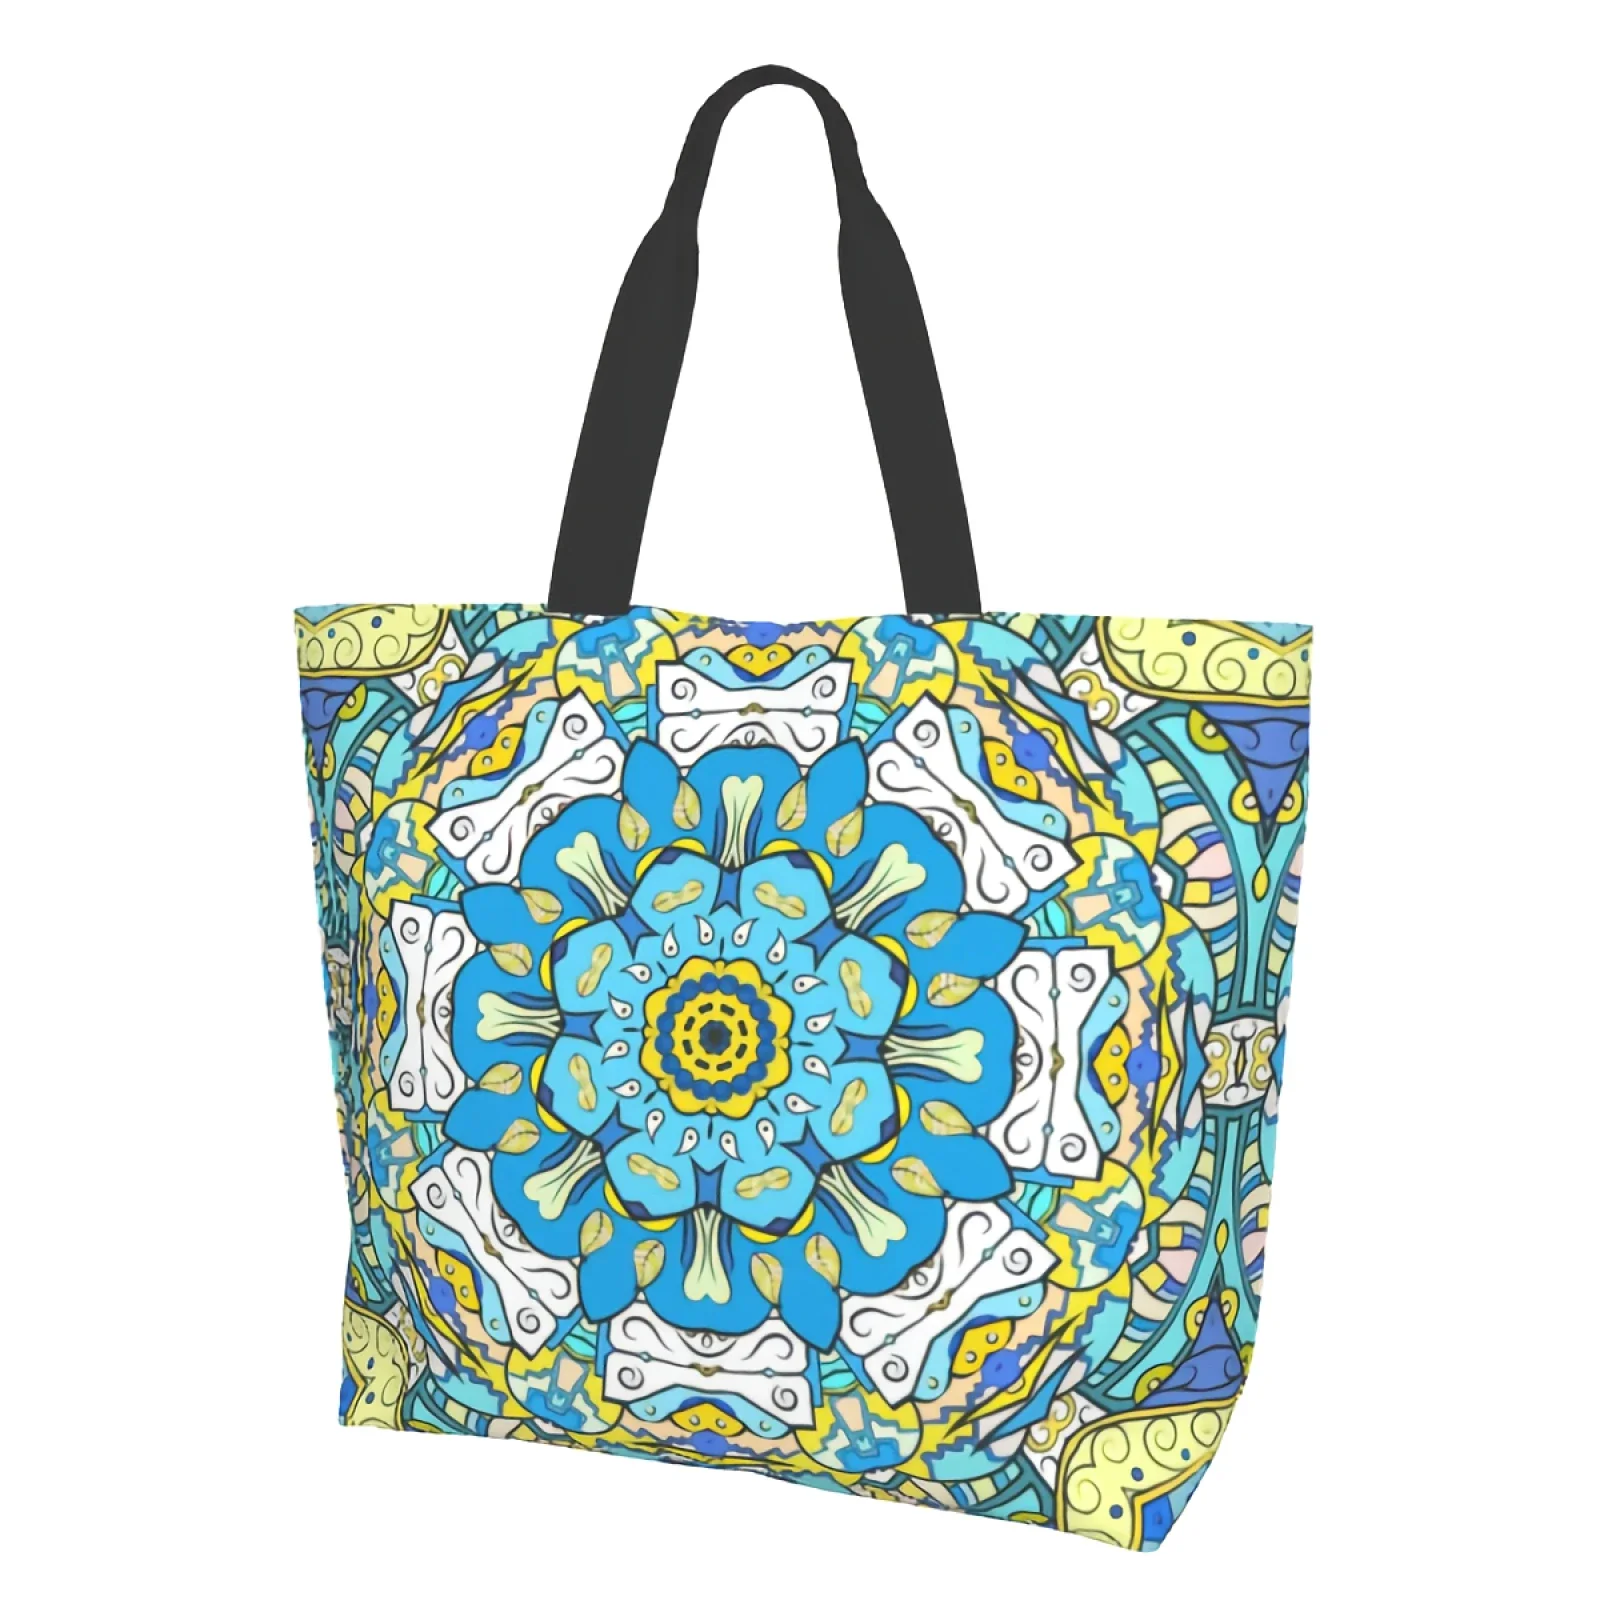 

Cute Daisy Boho Tracery Tile Traditional Spiritual Tribal Design Canvas Tote Bag for Women Weekend Kitchen Grocery Bag